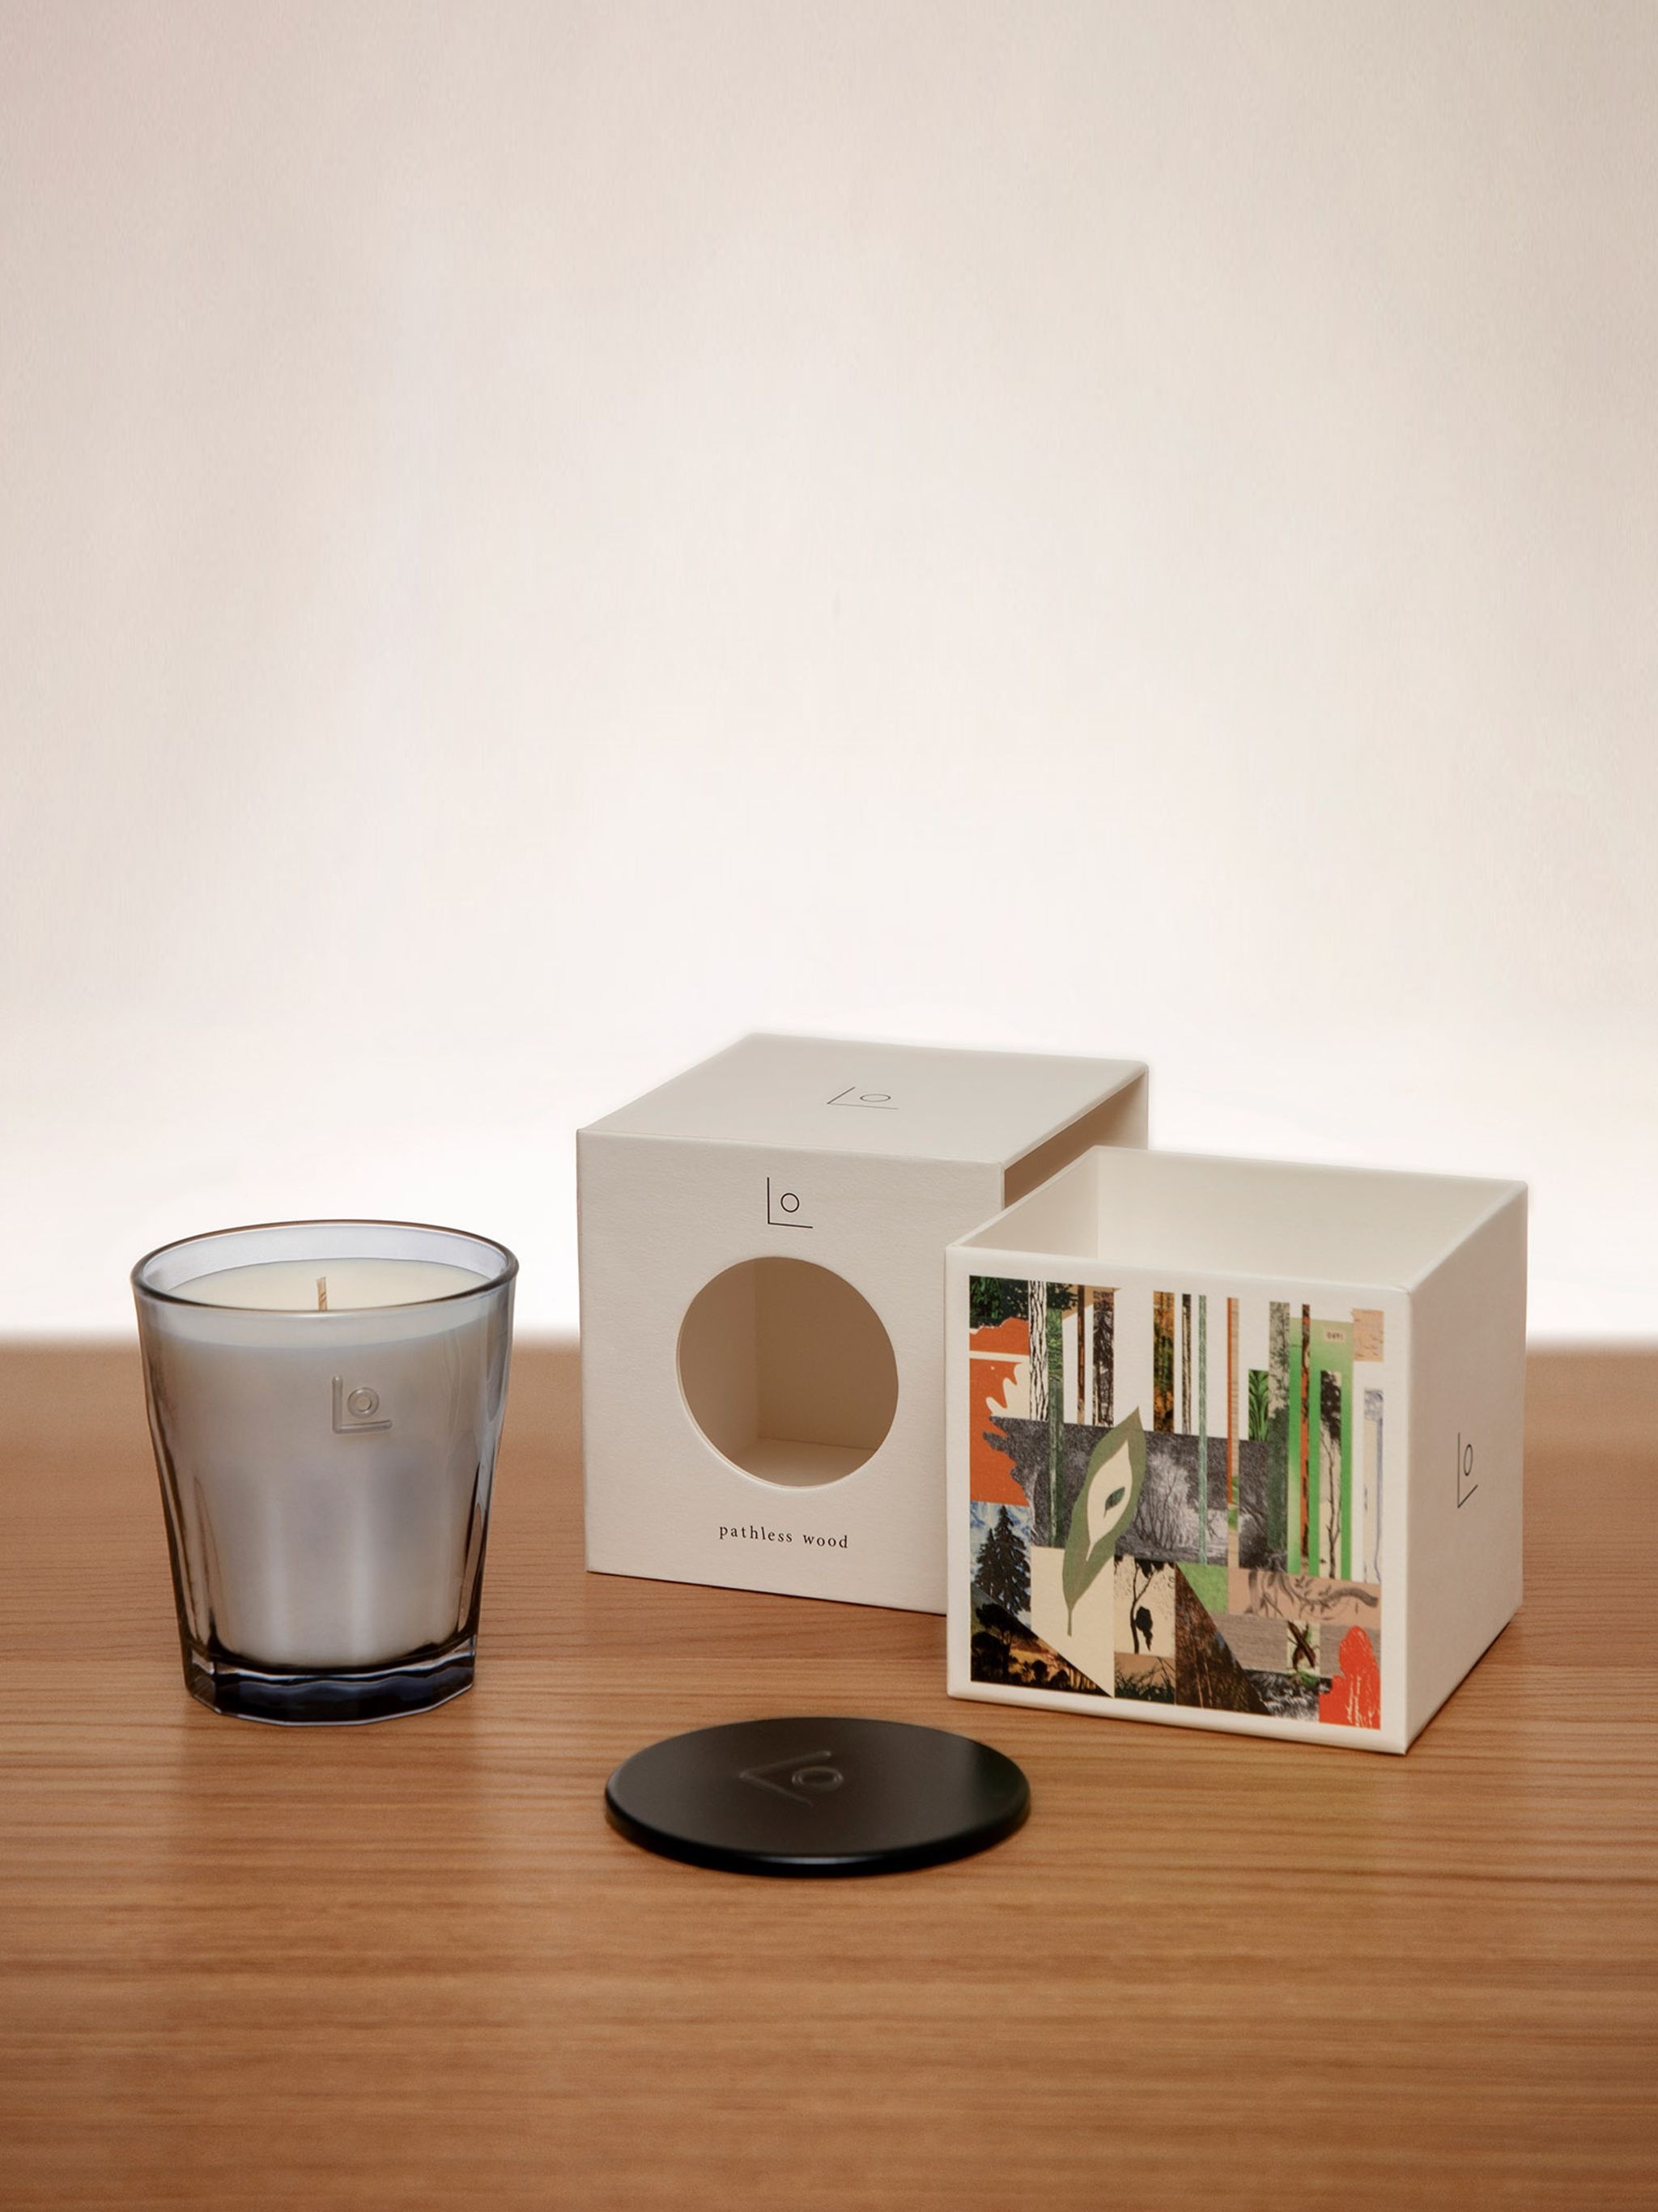 LO STUDIO PATHLESS WOOD SCENTED CANDLE - 2